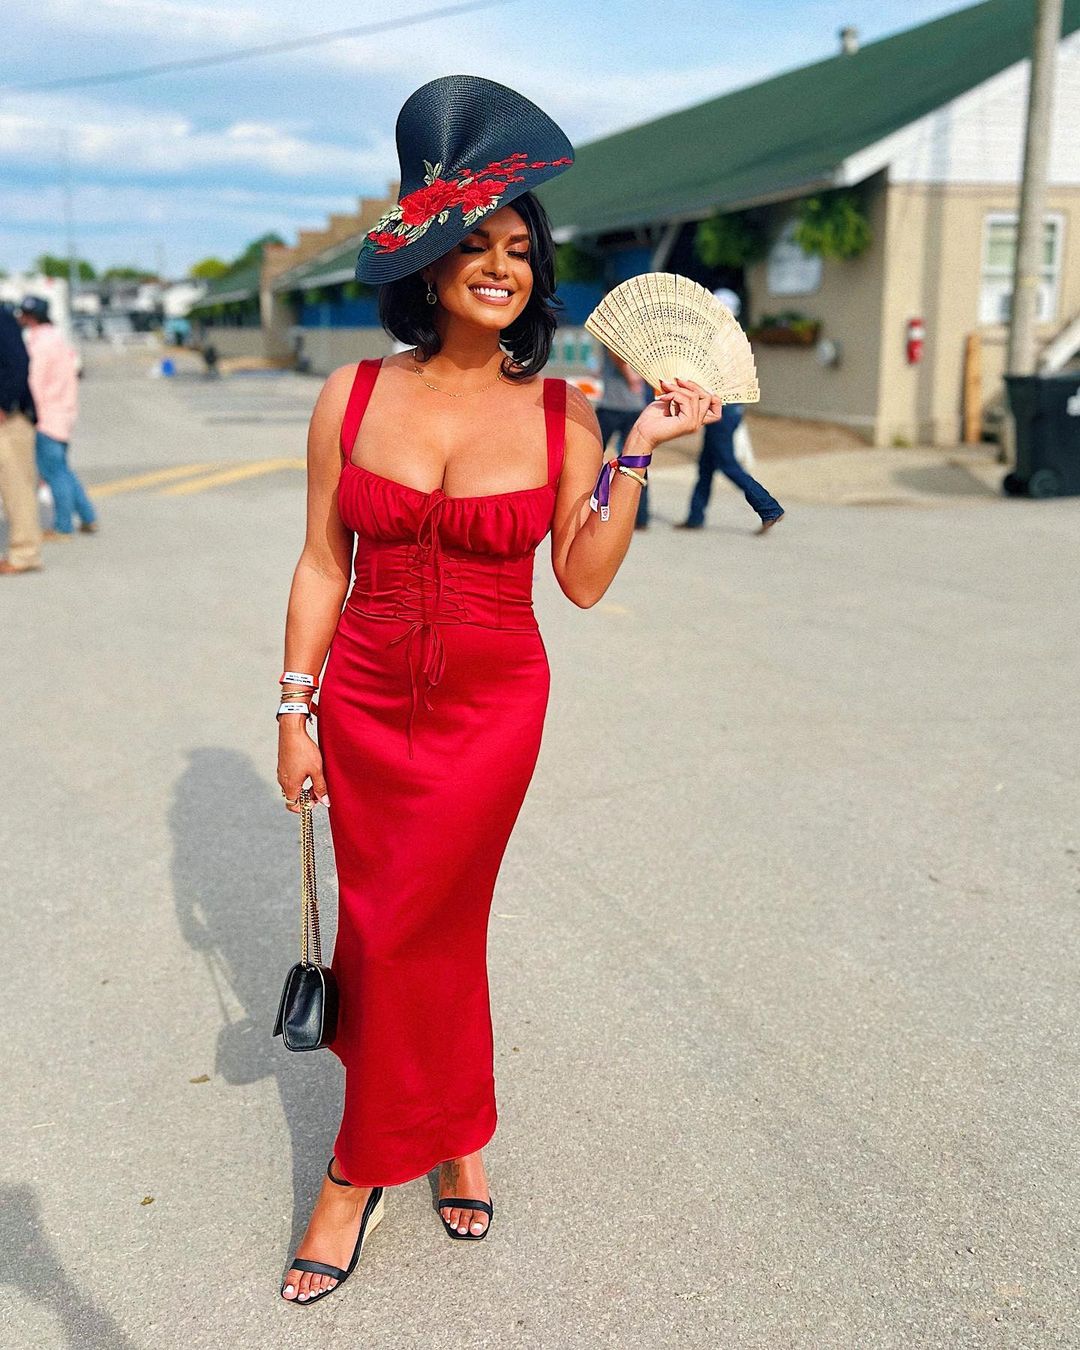 Joy Taylor at the Kentucky Derby is Impressive! - Photo 3